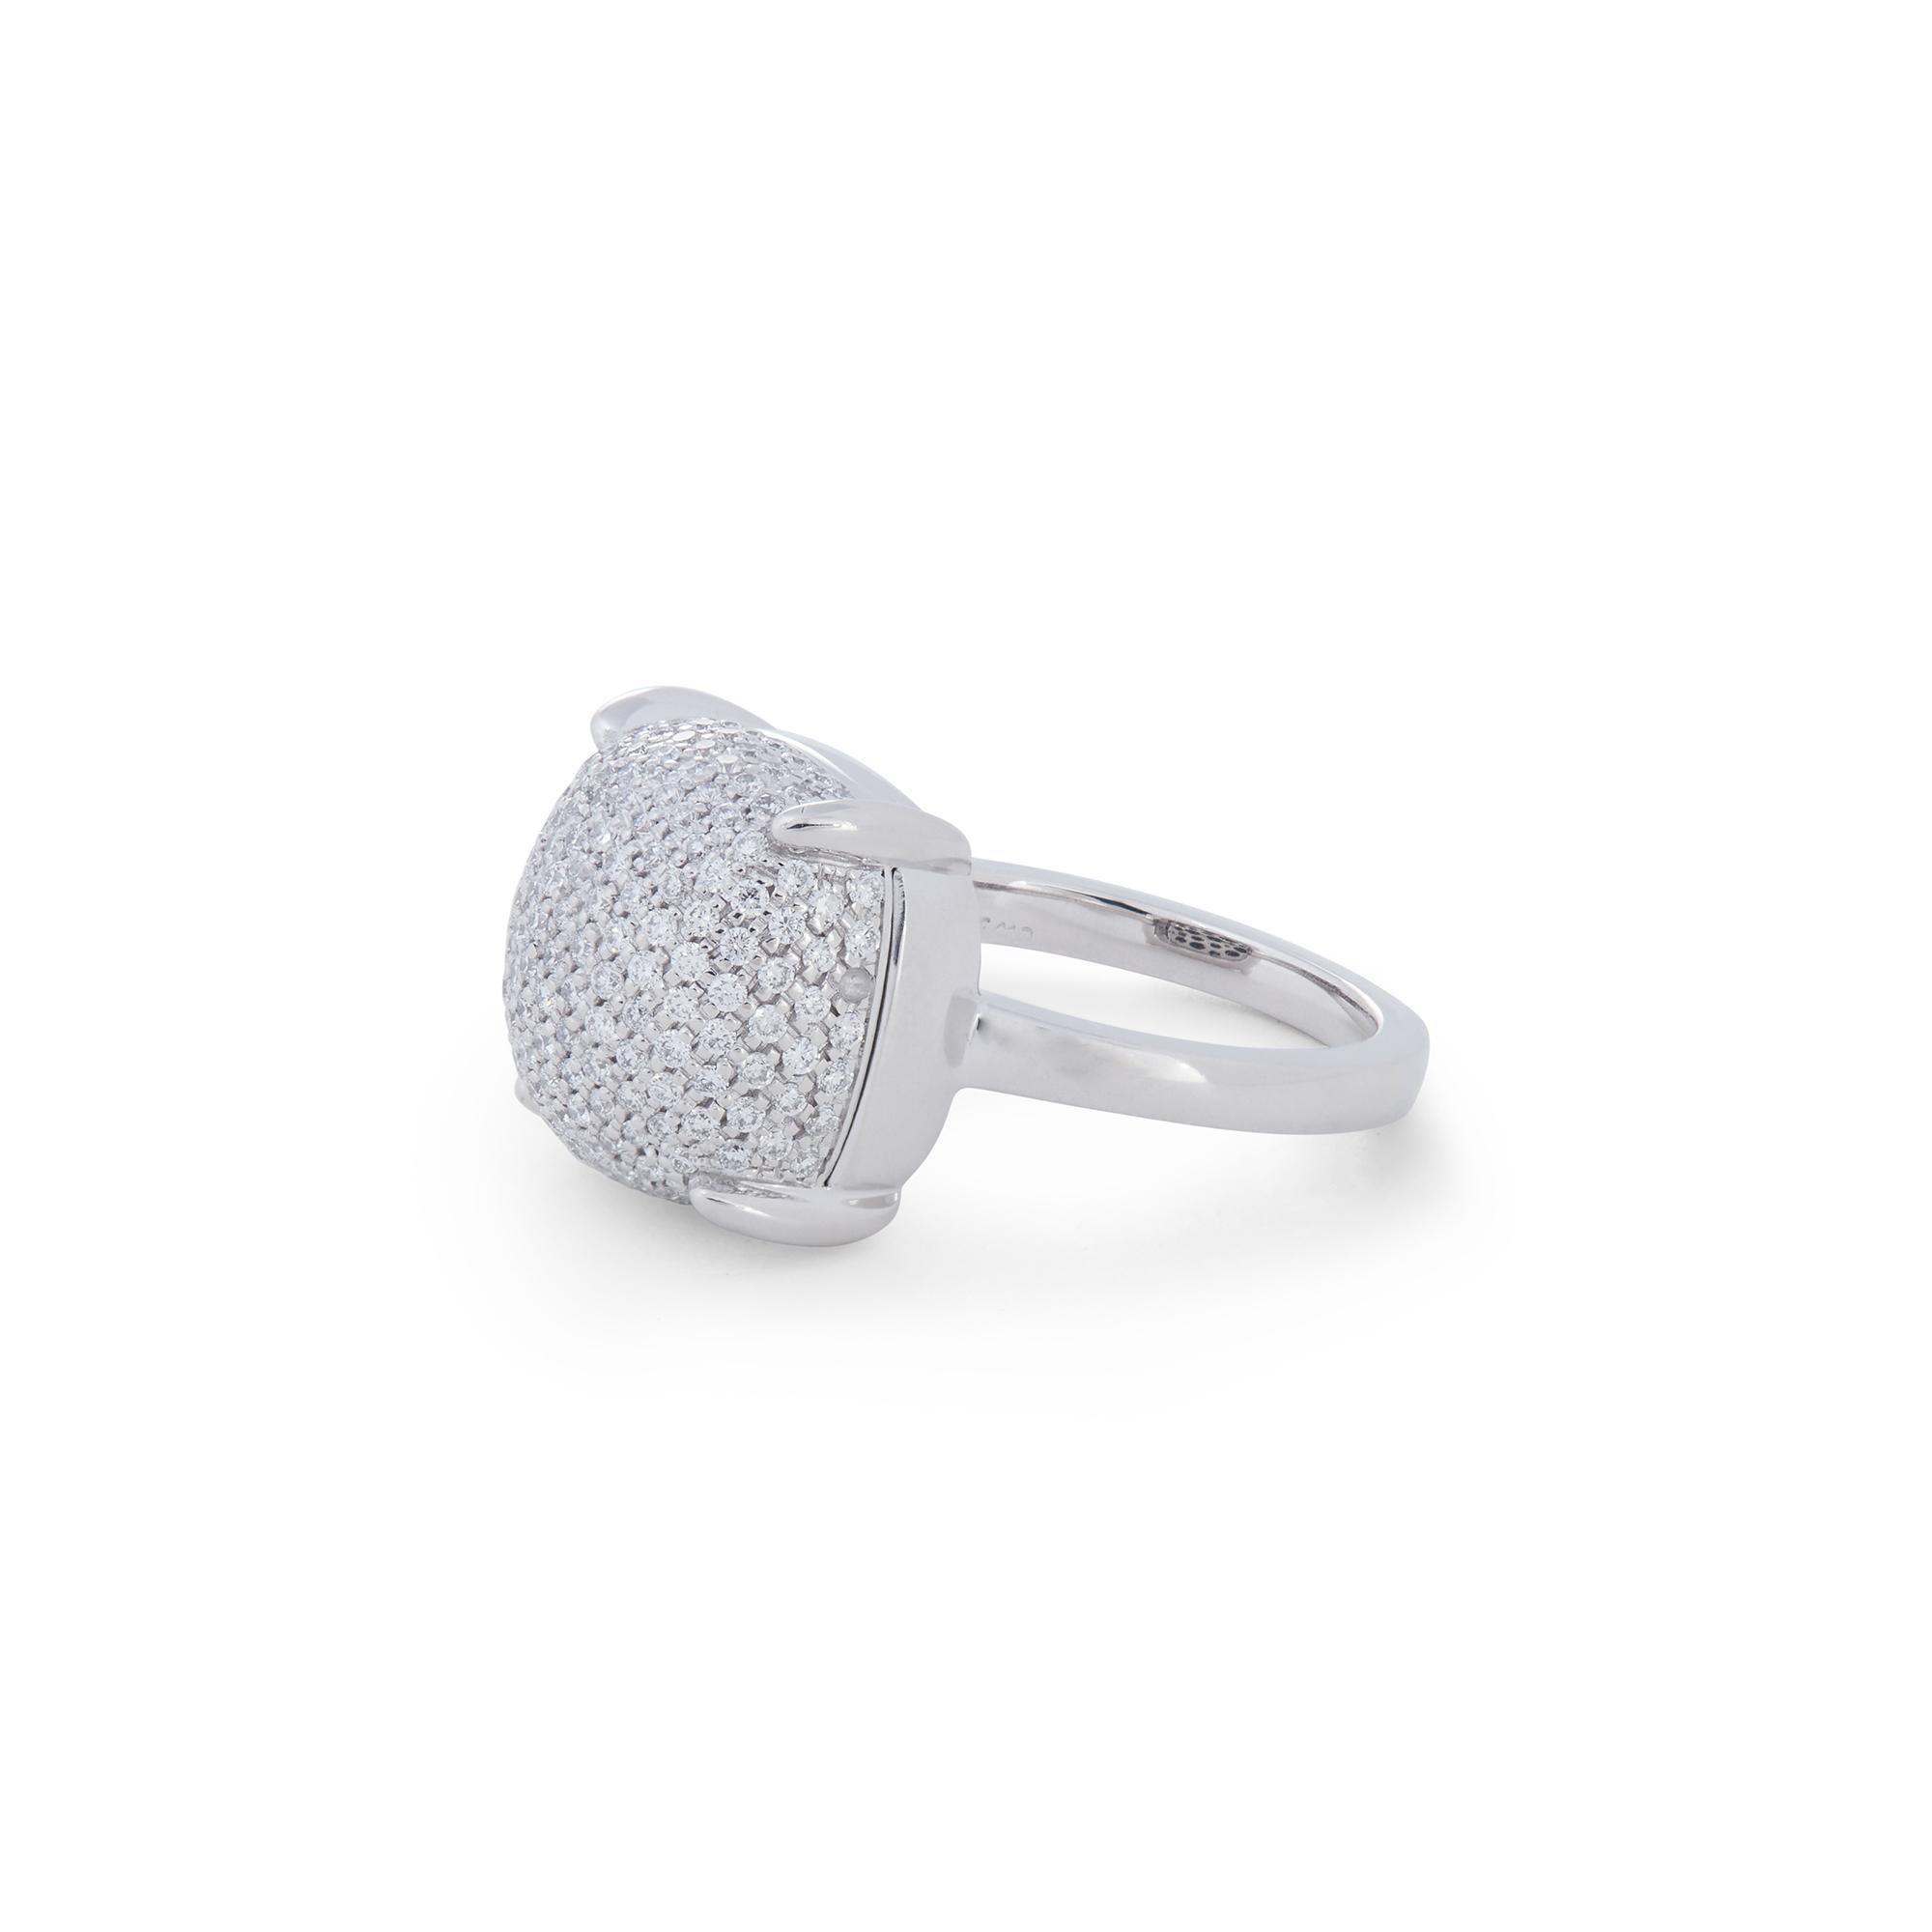 Authentic Tiffany & Co. Paloma's Sugar Stacks ring crafted in 18k white gold.  Resembling a glittering sugar cube, this sweet ring is pave set with an estimated 0.49 carats of diamonds.  Size 4.  Signed Palmo Picasso, Tiffany & Co., AU750, Italy. 